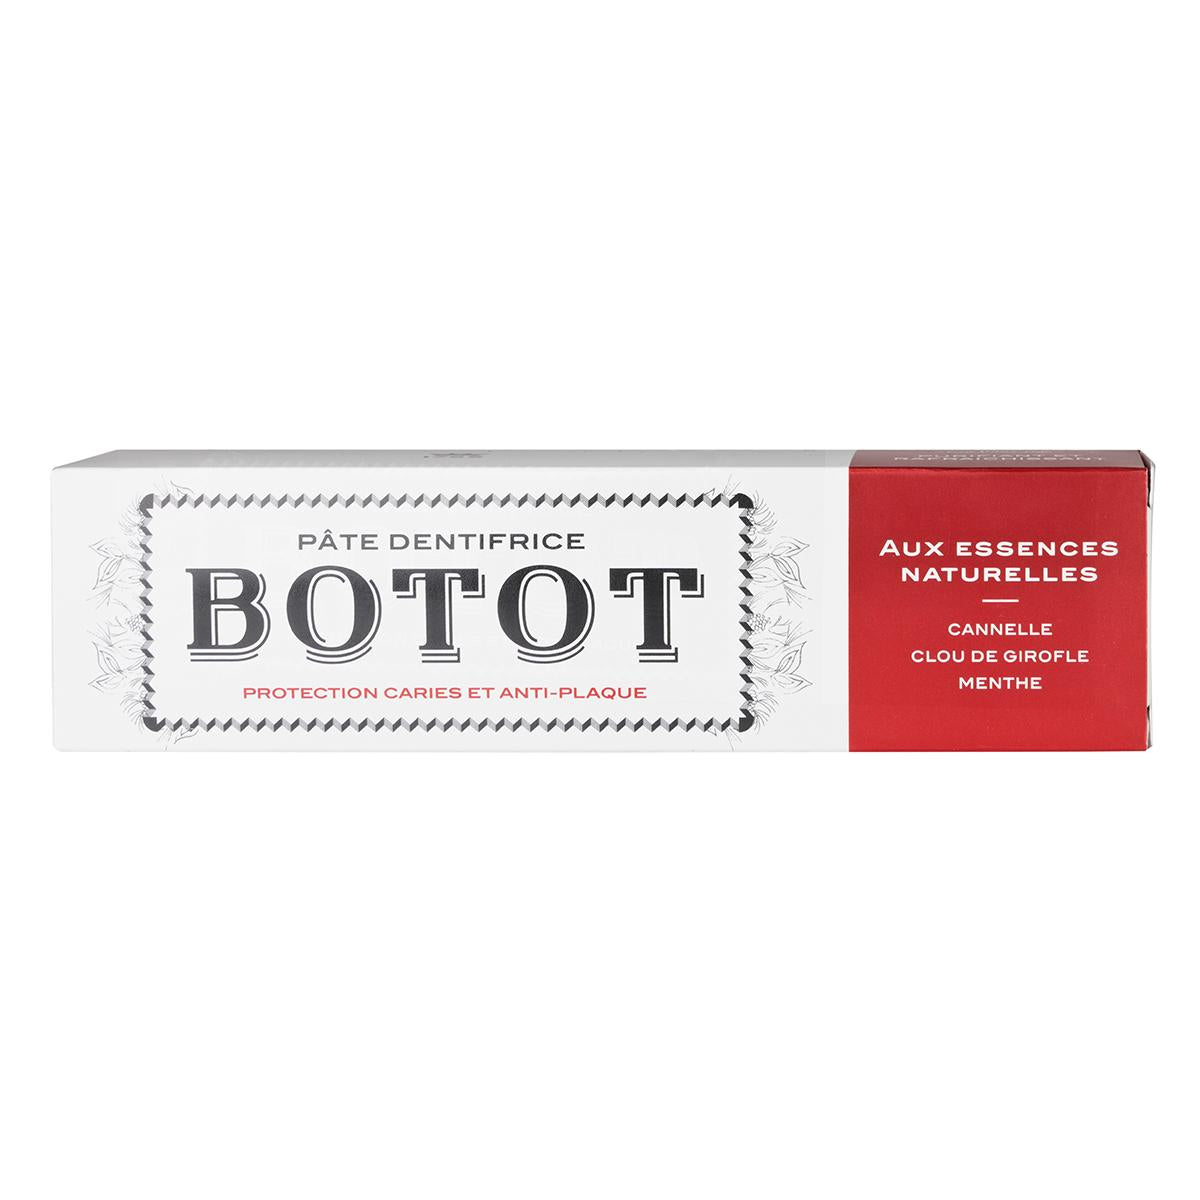 Primary image of Botot Red Toothpaste